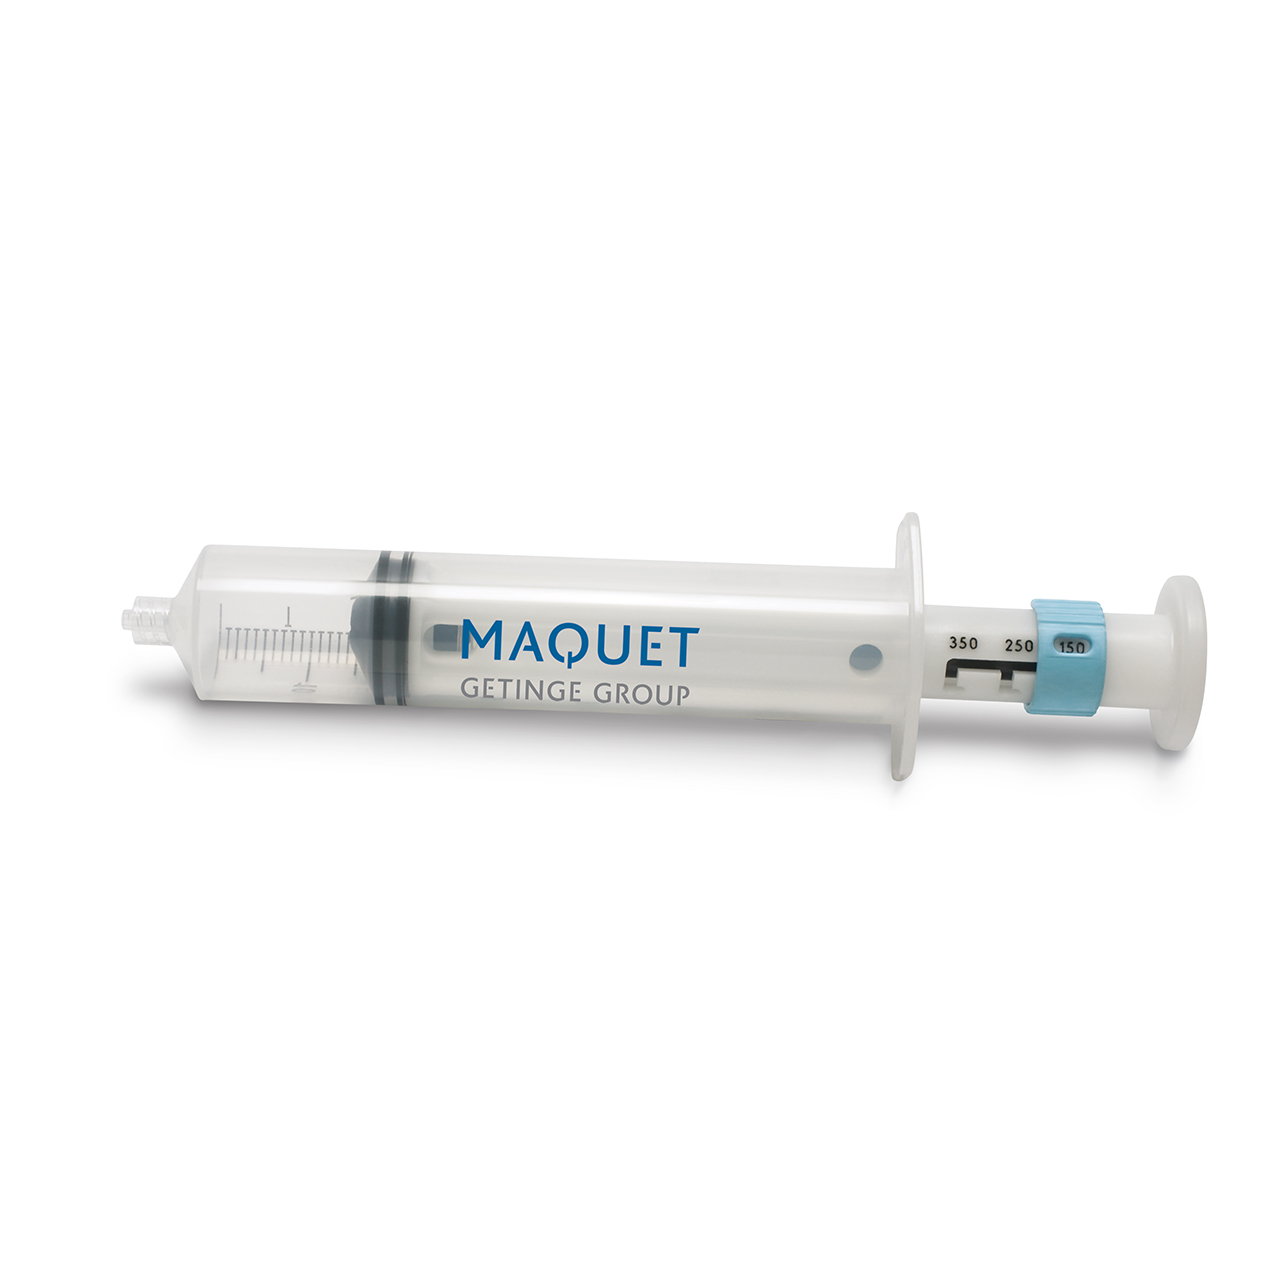 Vasoshield Pressure Controlling Syringe helps protect vessels against overdistension and potentail endothelial damage